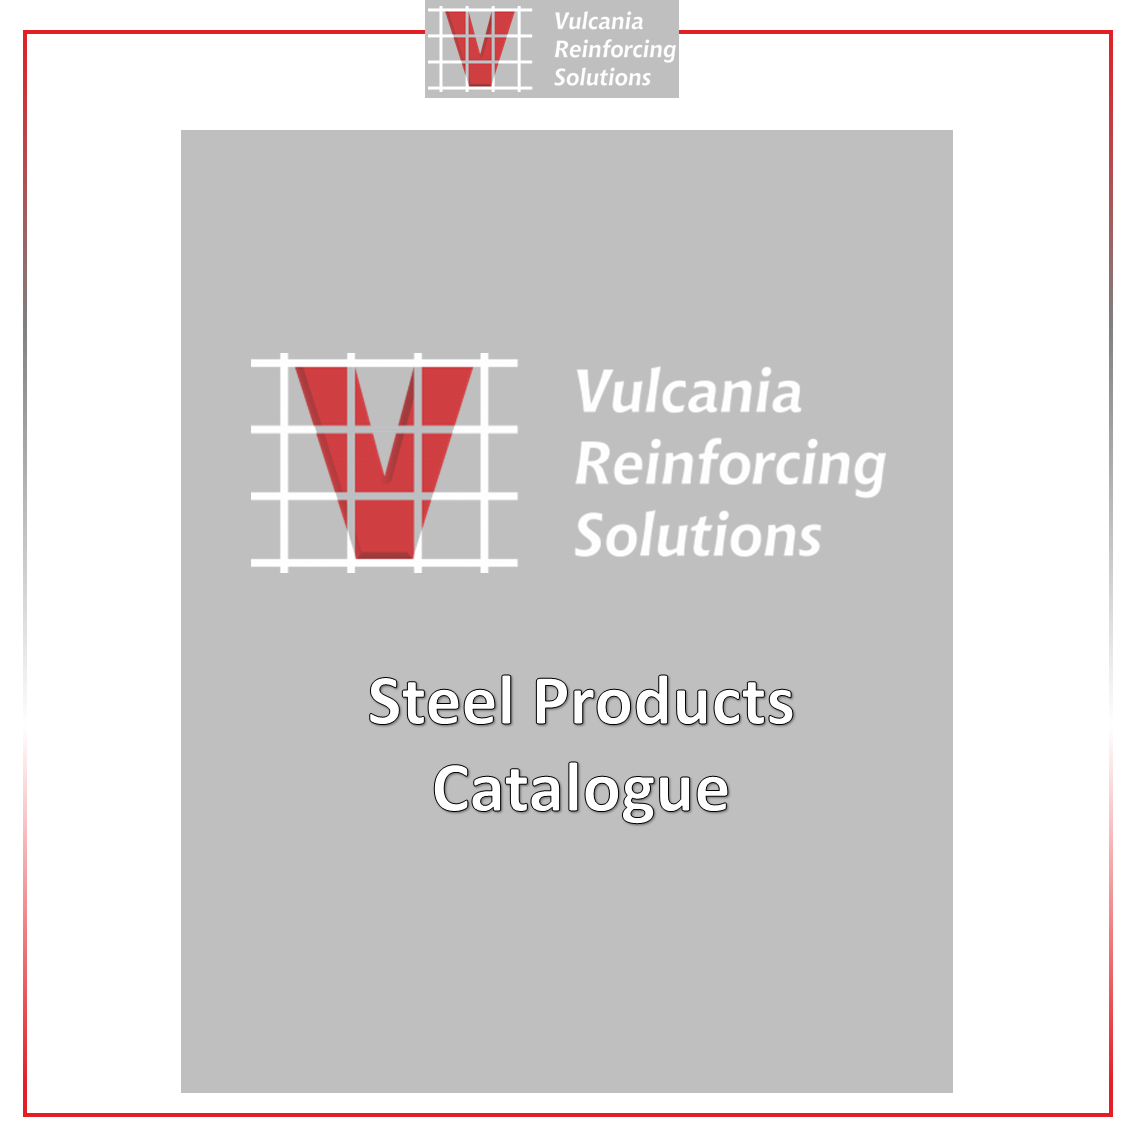 VULCANIA - Steel Products Catalogue